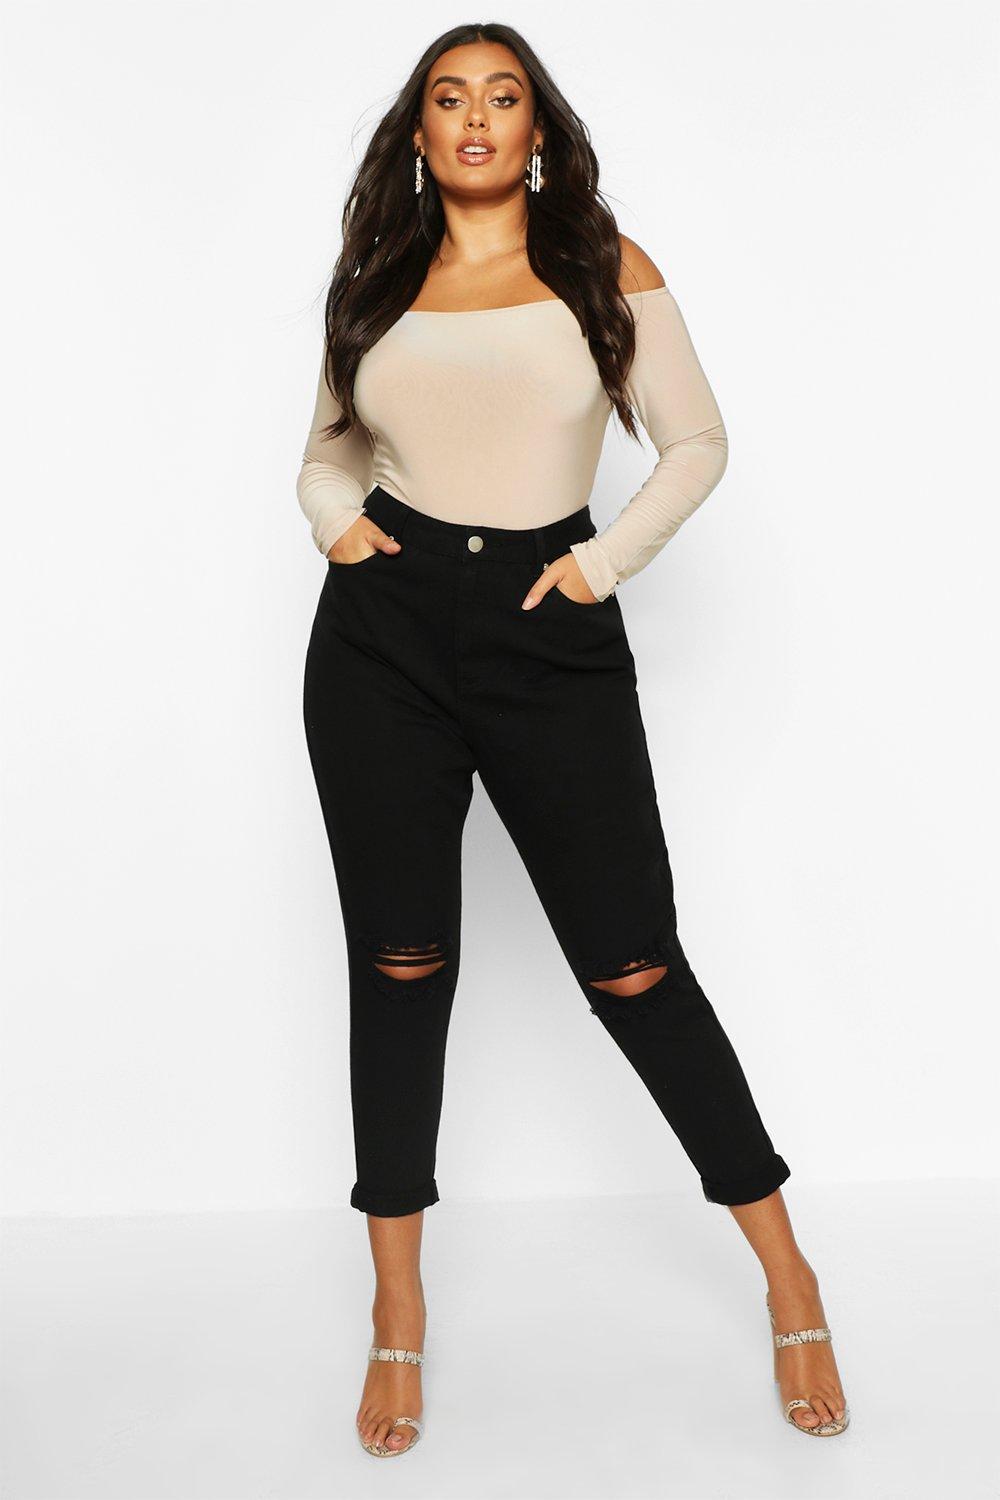 high waisted ripped skinny jeans plus size